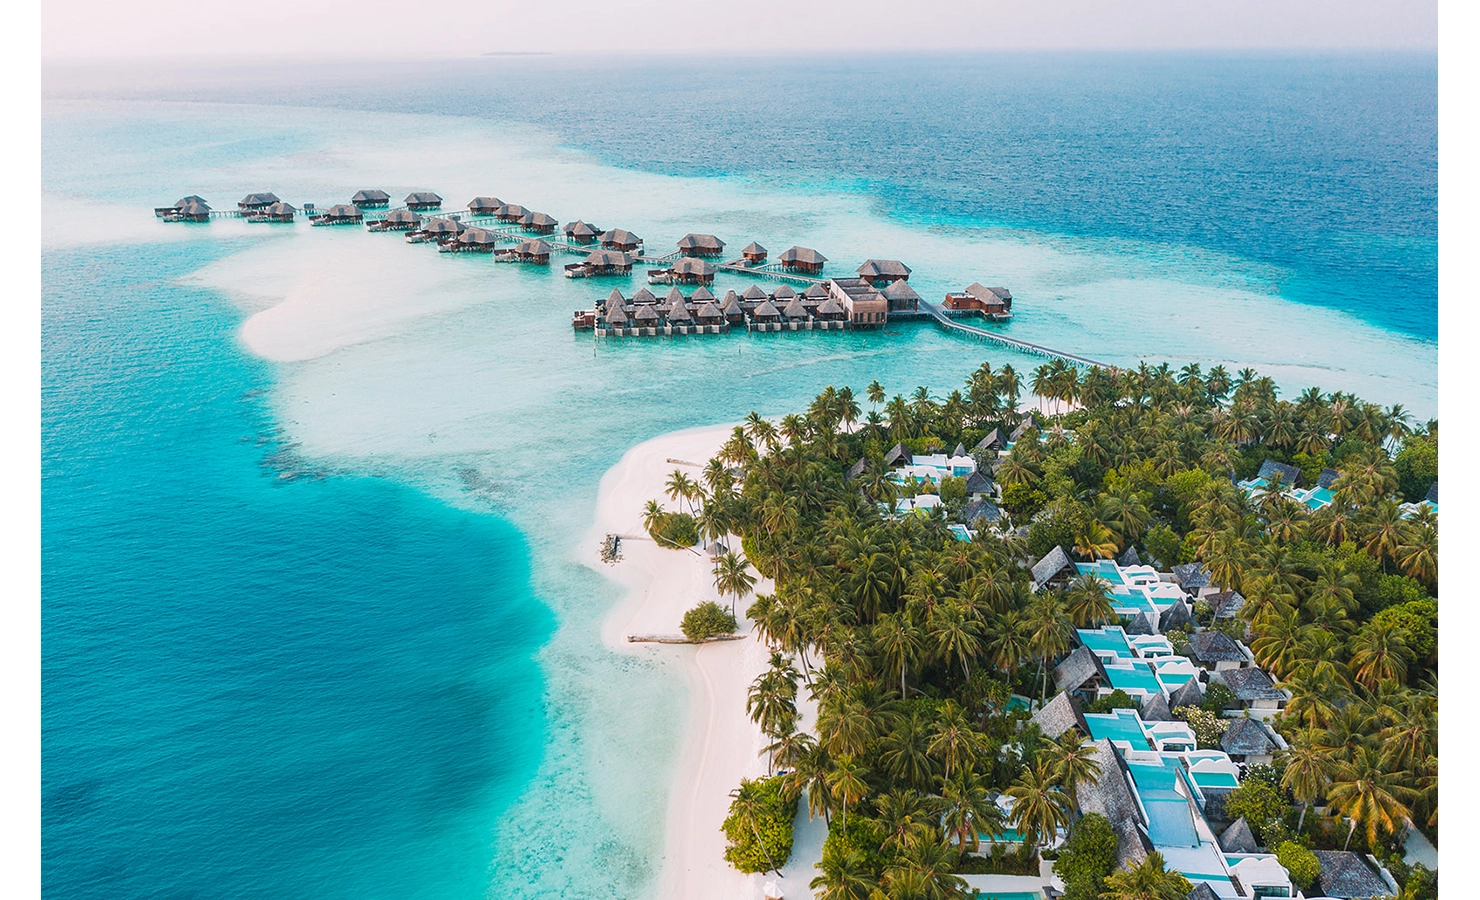 Perfect Hideaways, Conrad Maldives, Aerial view of luxury accommodation